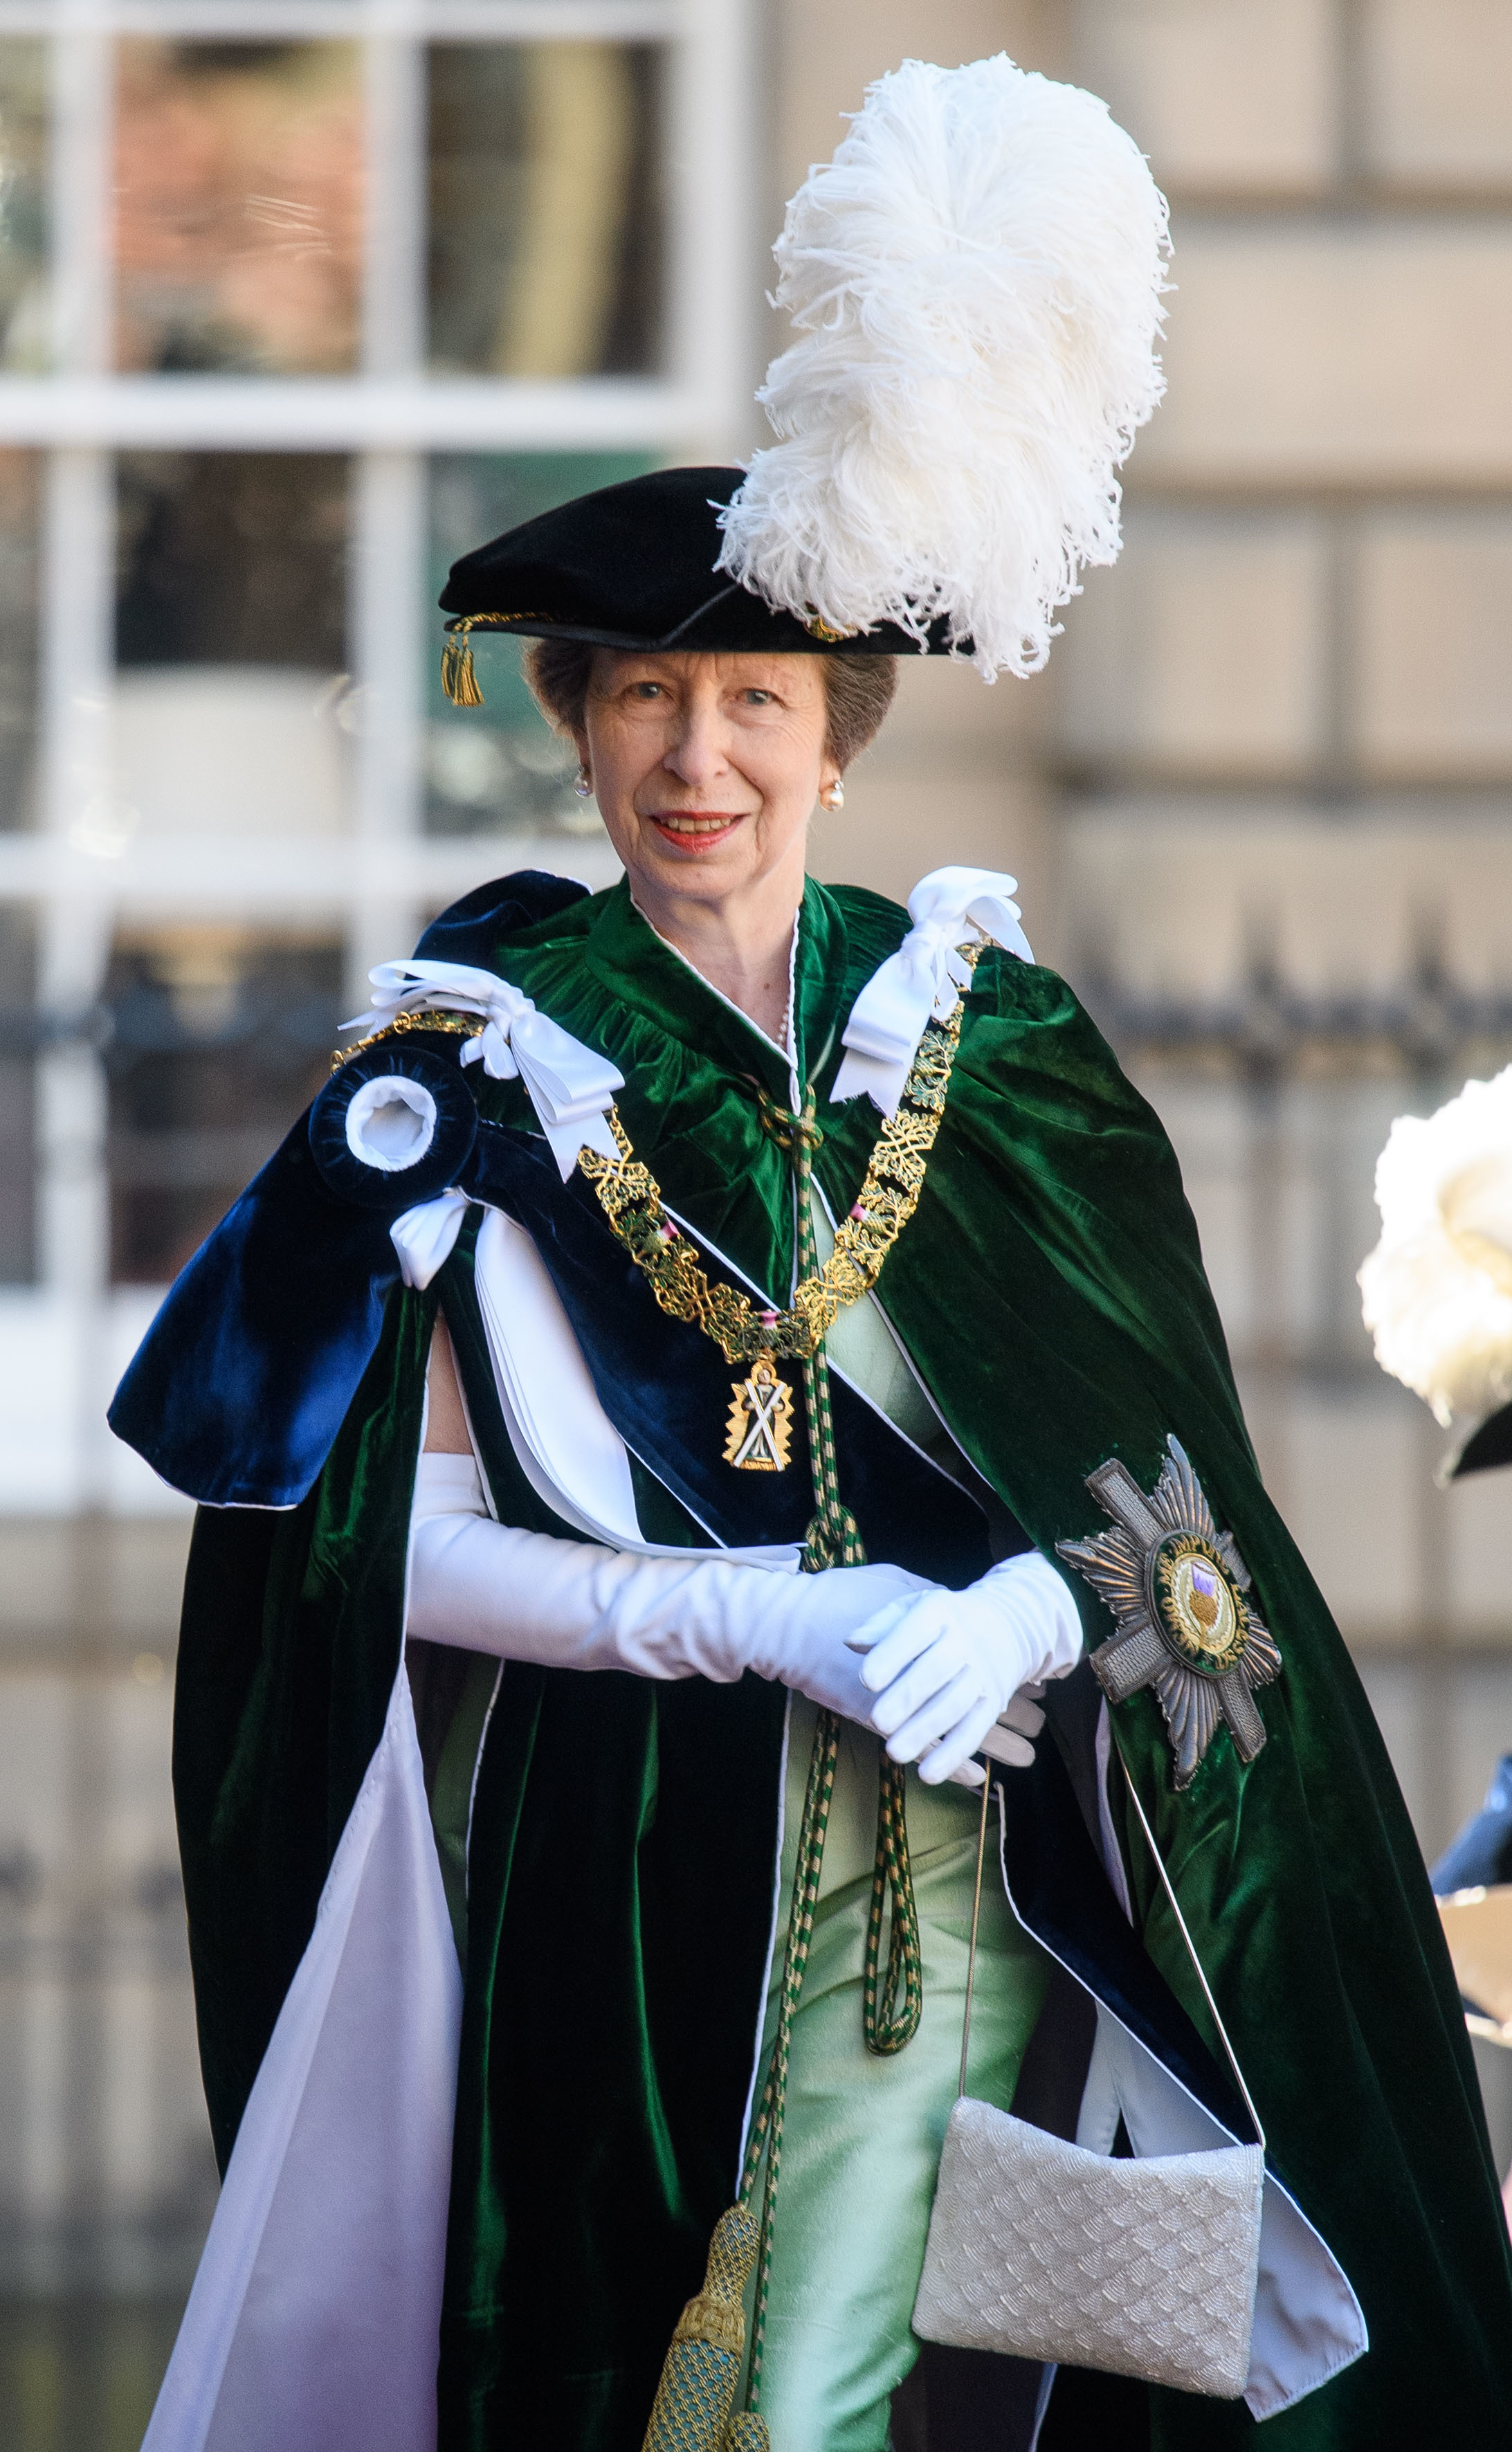 <p>Clad in traditional regalia, Princess Anne also attended the Order of the Thistle Ceremony at St. Giles Cathedral in Edinburgh, Scotland, on July 6, 2018.</p>